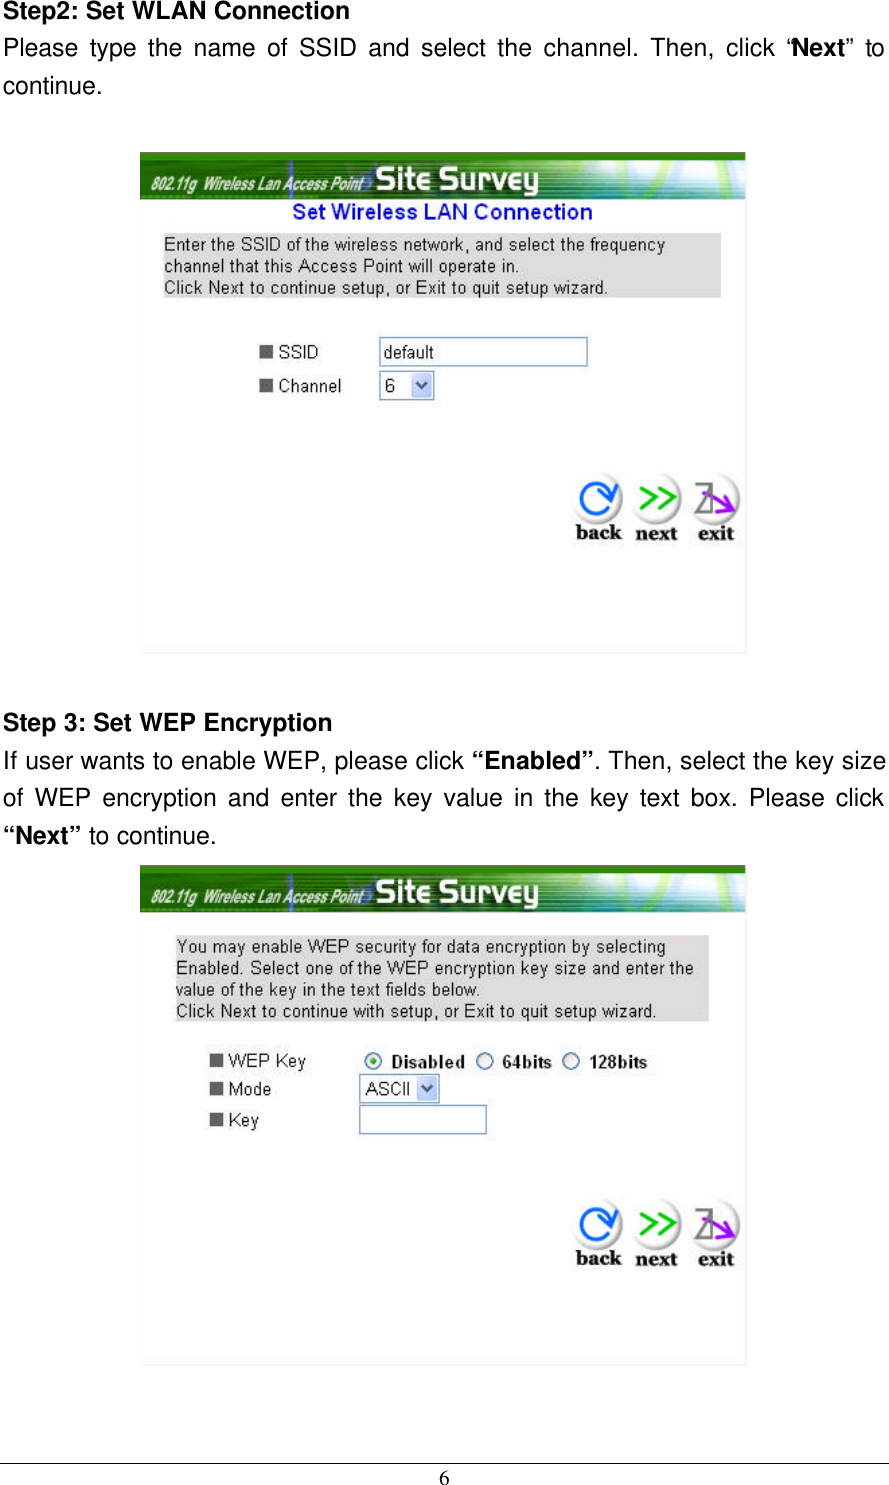  6 Step2: Set WLAN Connection Please type the name of SSID and select the channel. Then, click “Next” to continue.    Step 3: Set WEP Encryption If user wants to enable WEP, please click “Enabled”. Then, select the key size of WEP encryption and enter the key value in the key text box. Please click “Next” to continue.   